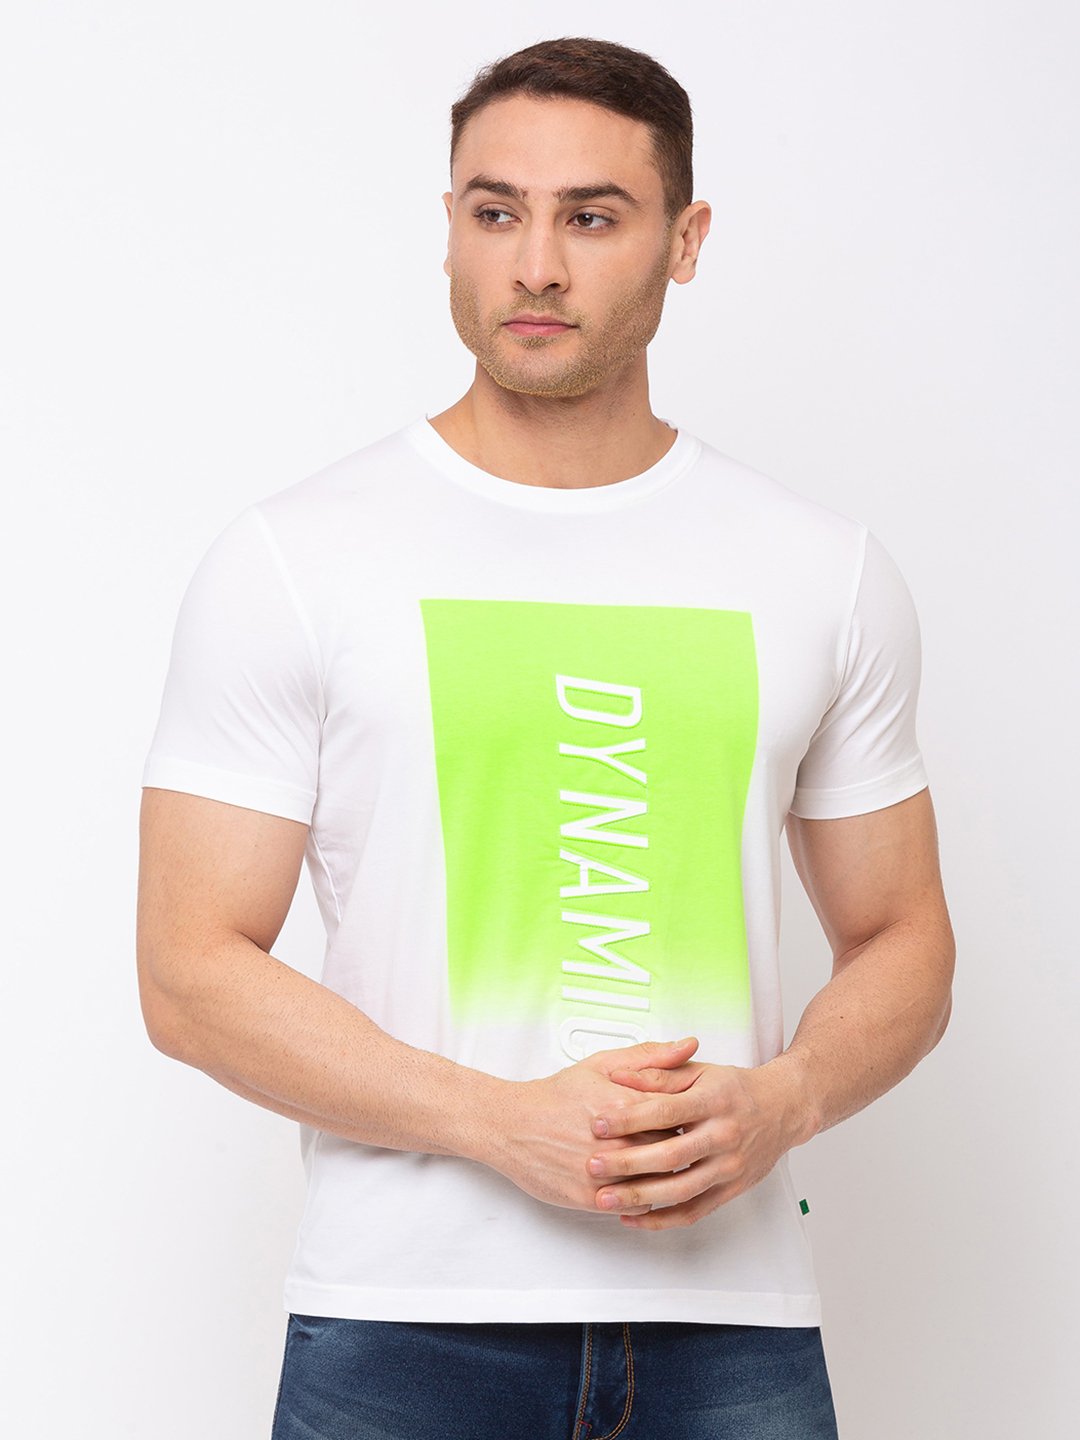 Status Quo |Chest Print Round Neck T-shirt which is Embossed with Transfer Sticker - M, L, XL, XXL